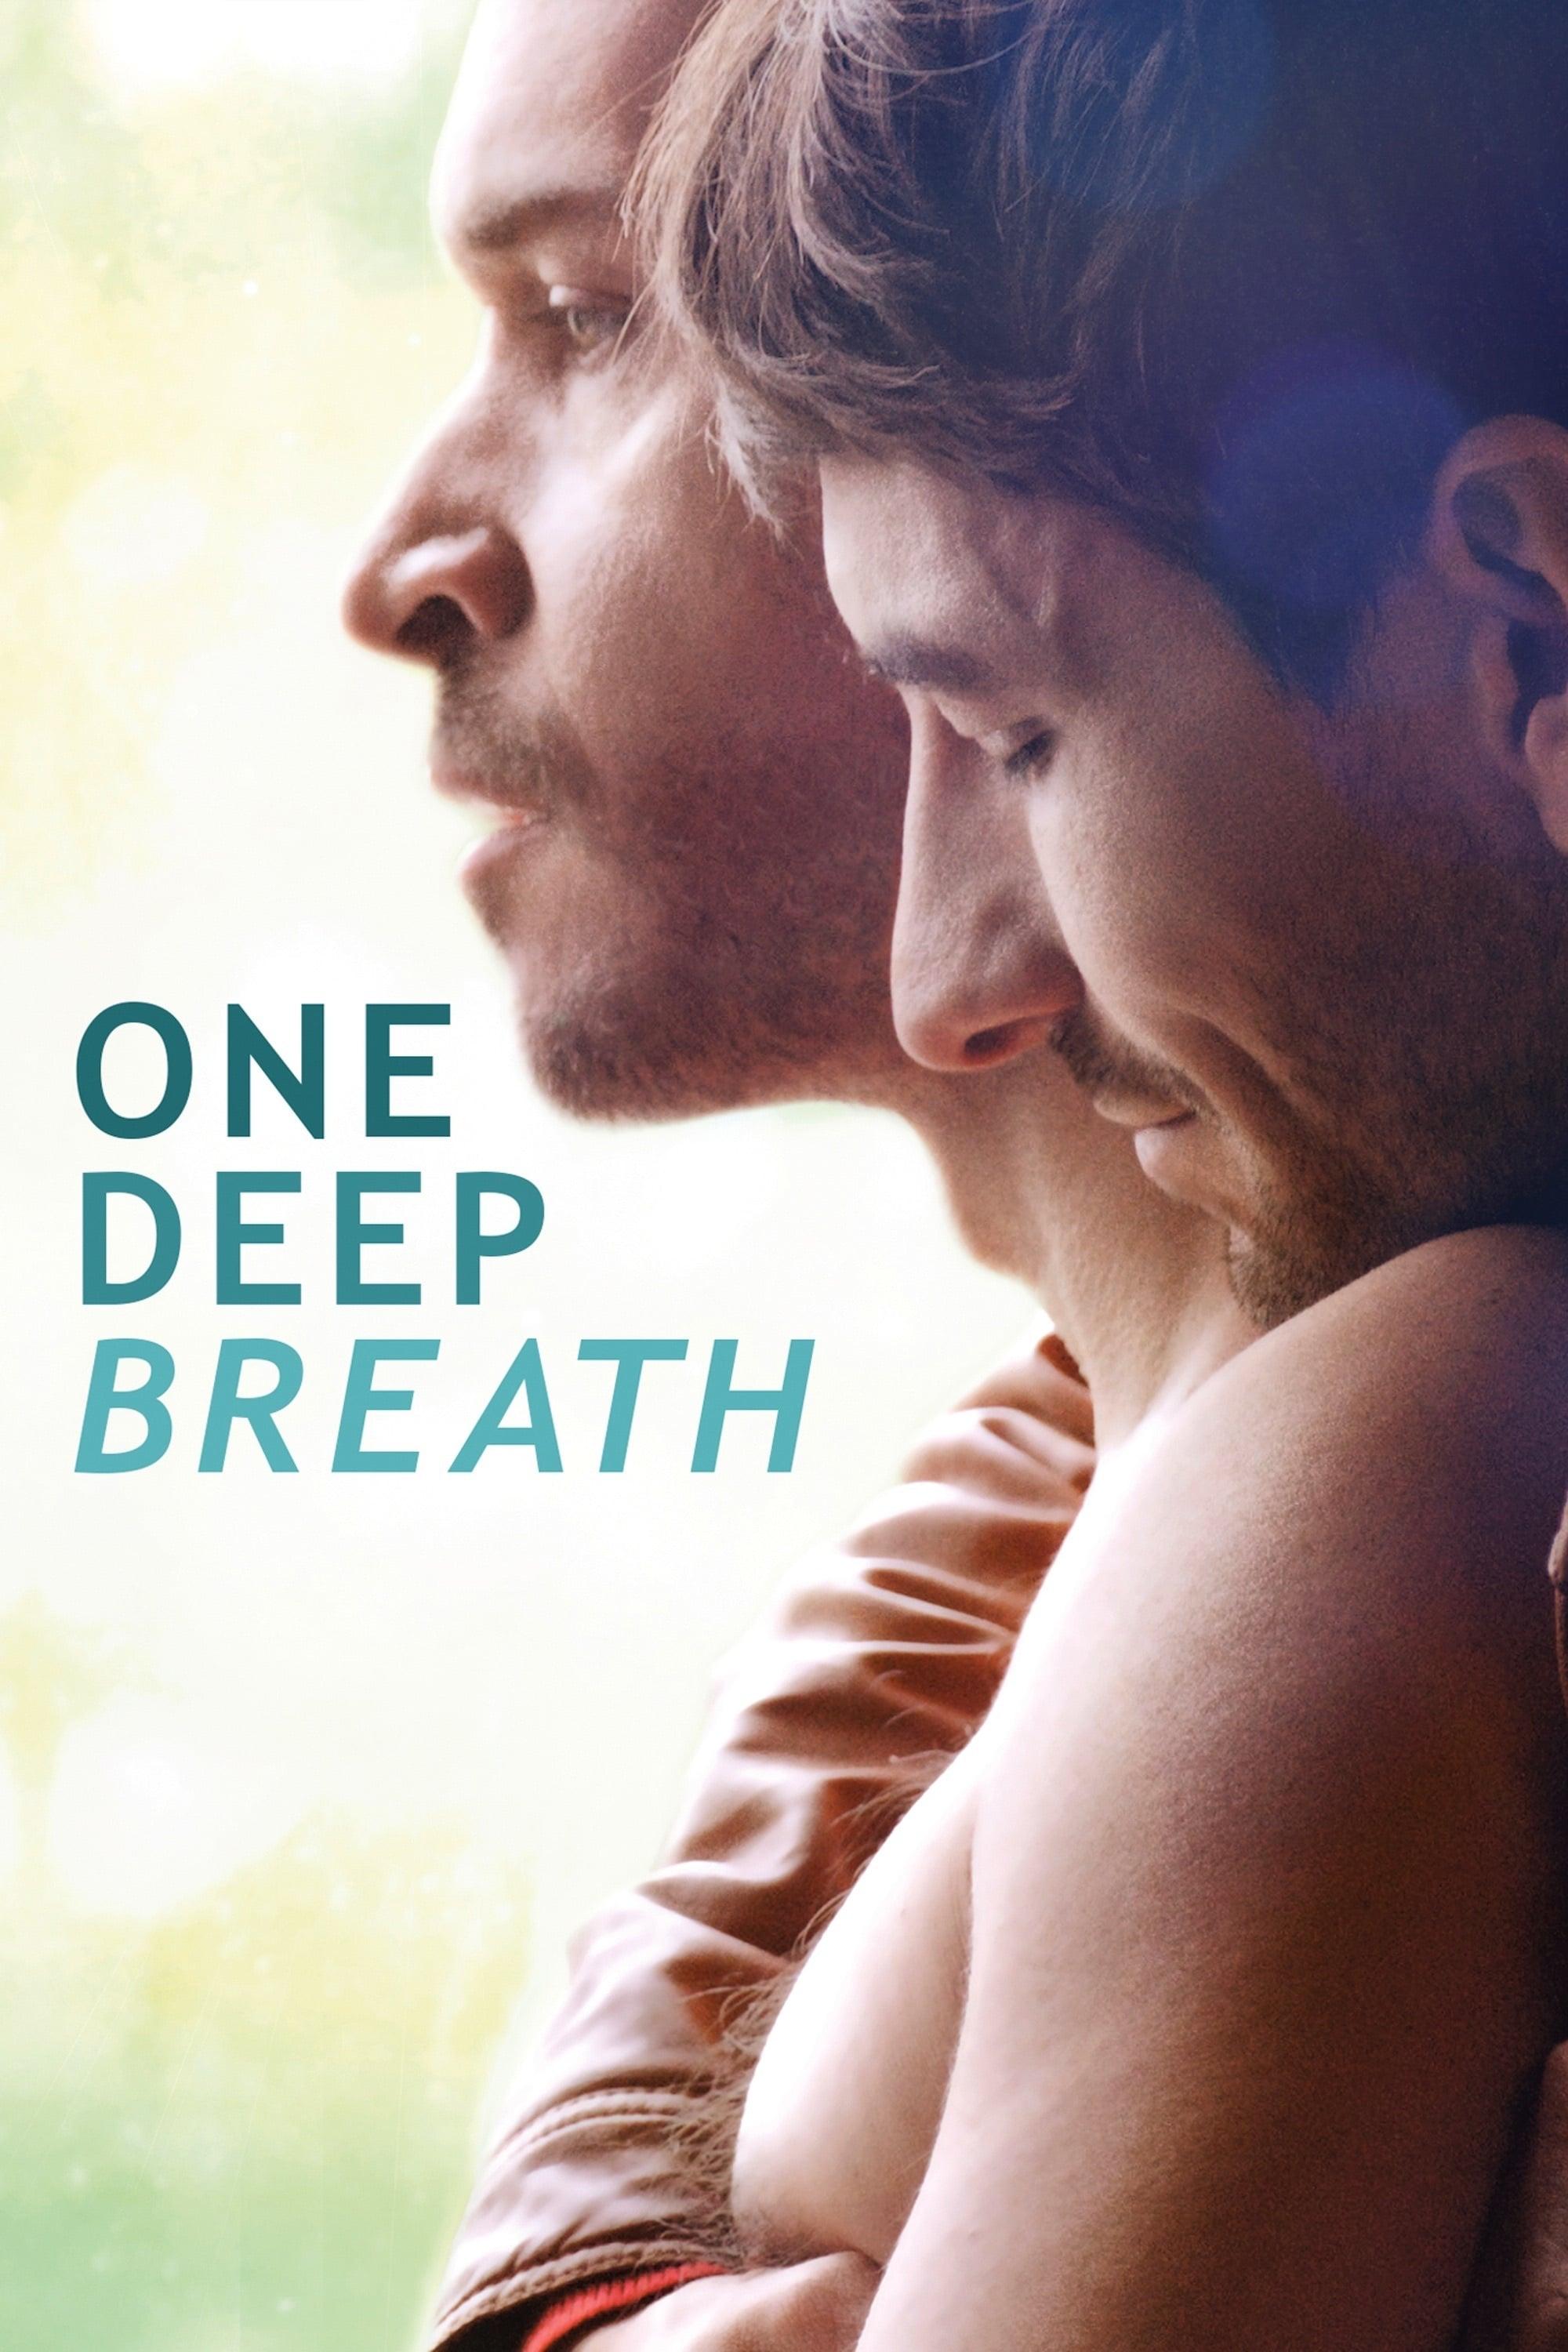 One Deep Breath poster